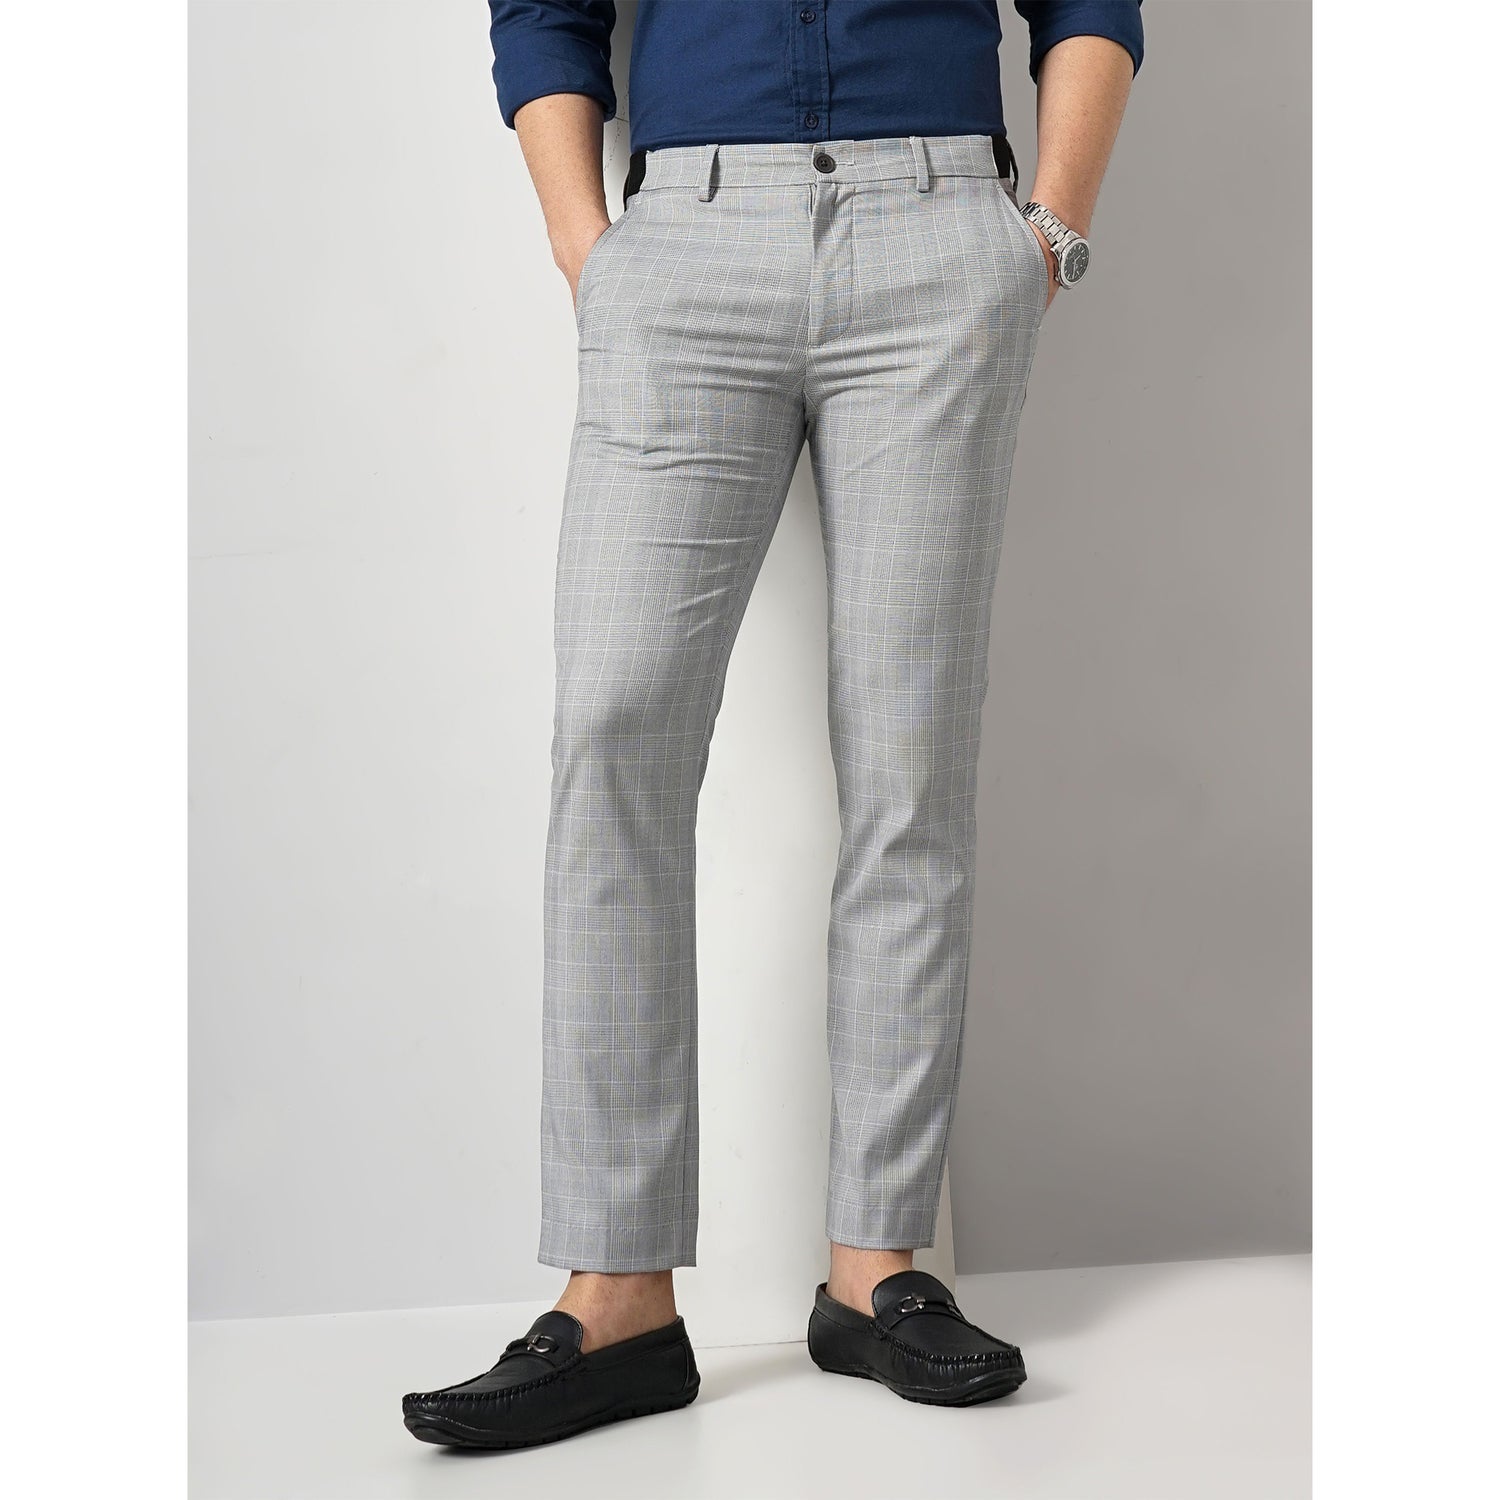 Poly-Blend Grey Solid Formal Trousers